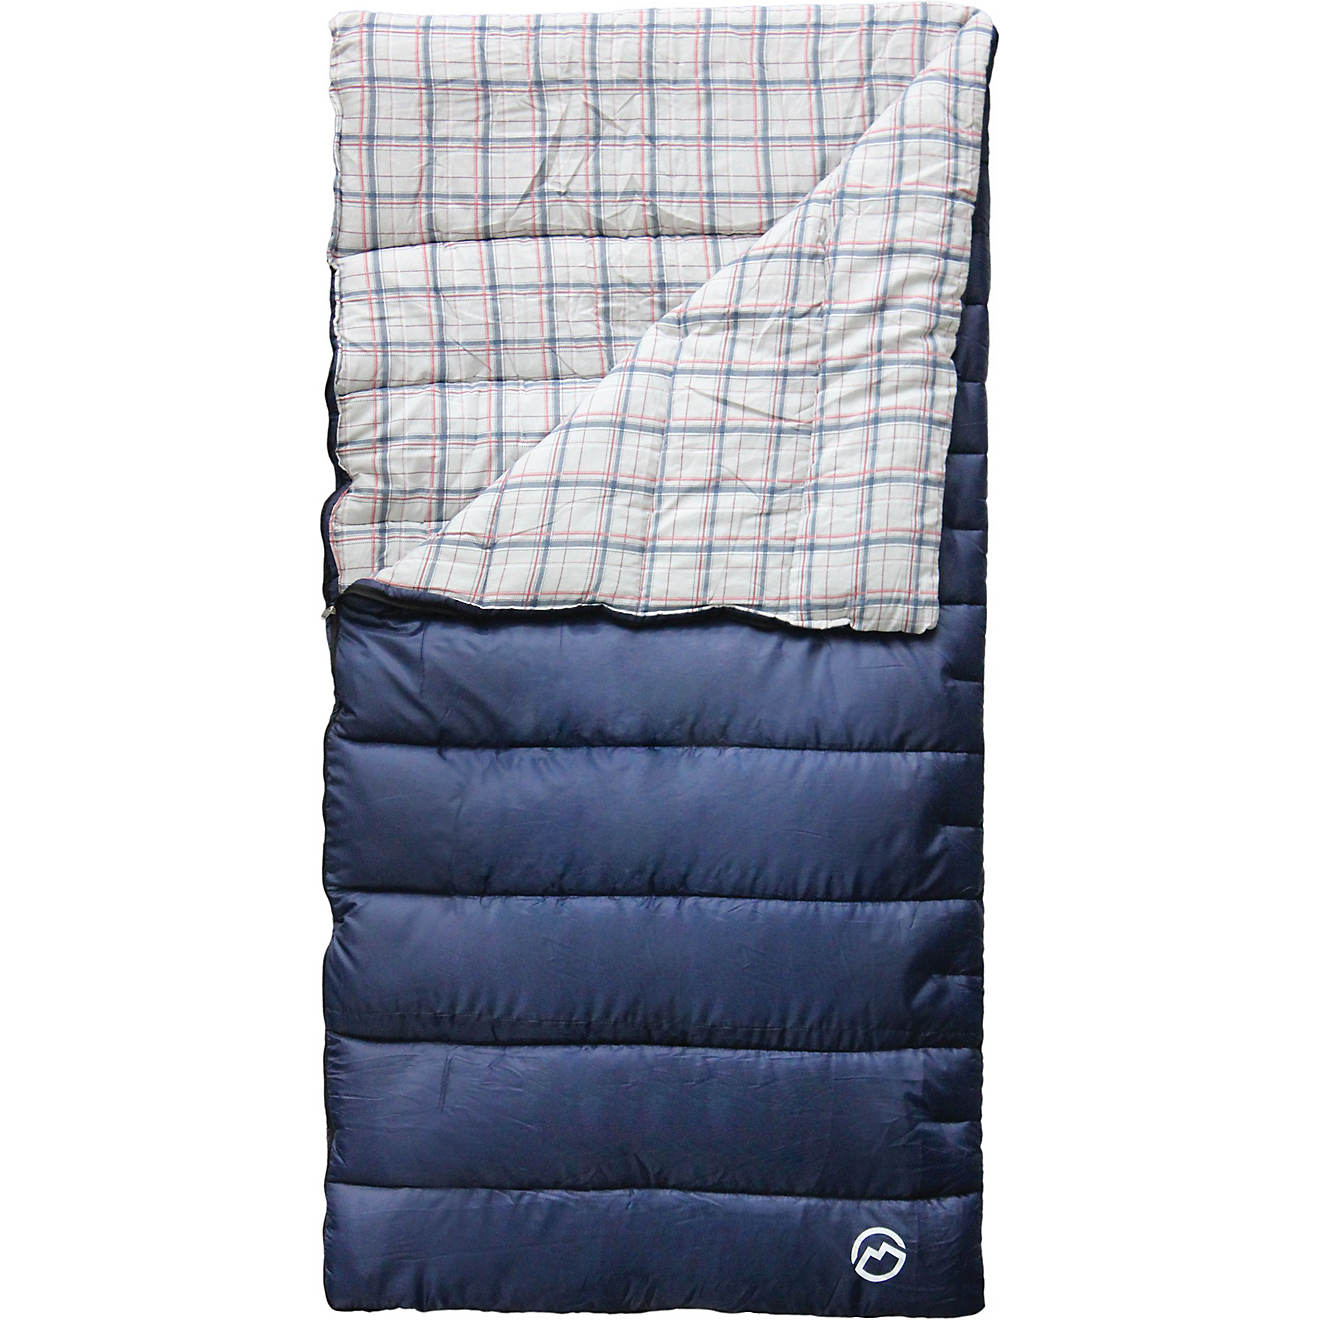 Magellan Outdoors 4 lbs Flannel Lined Rectangle Sleeping Bag